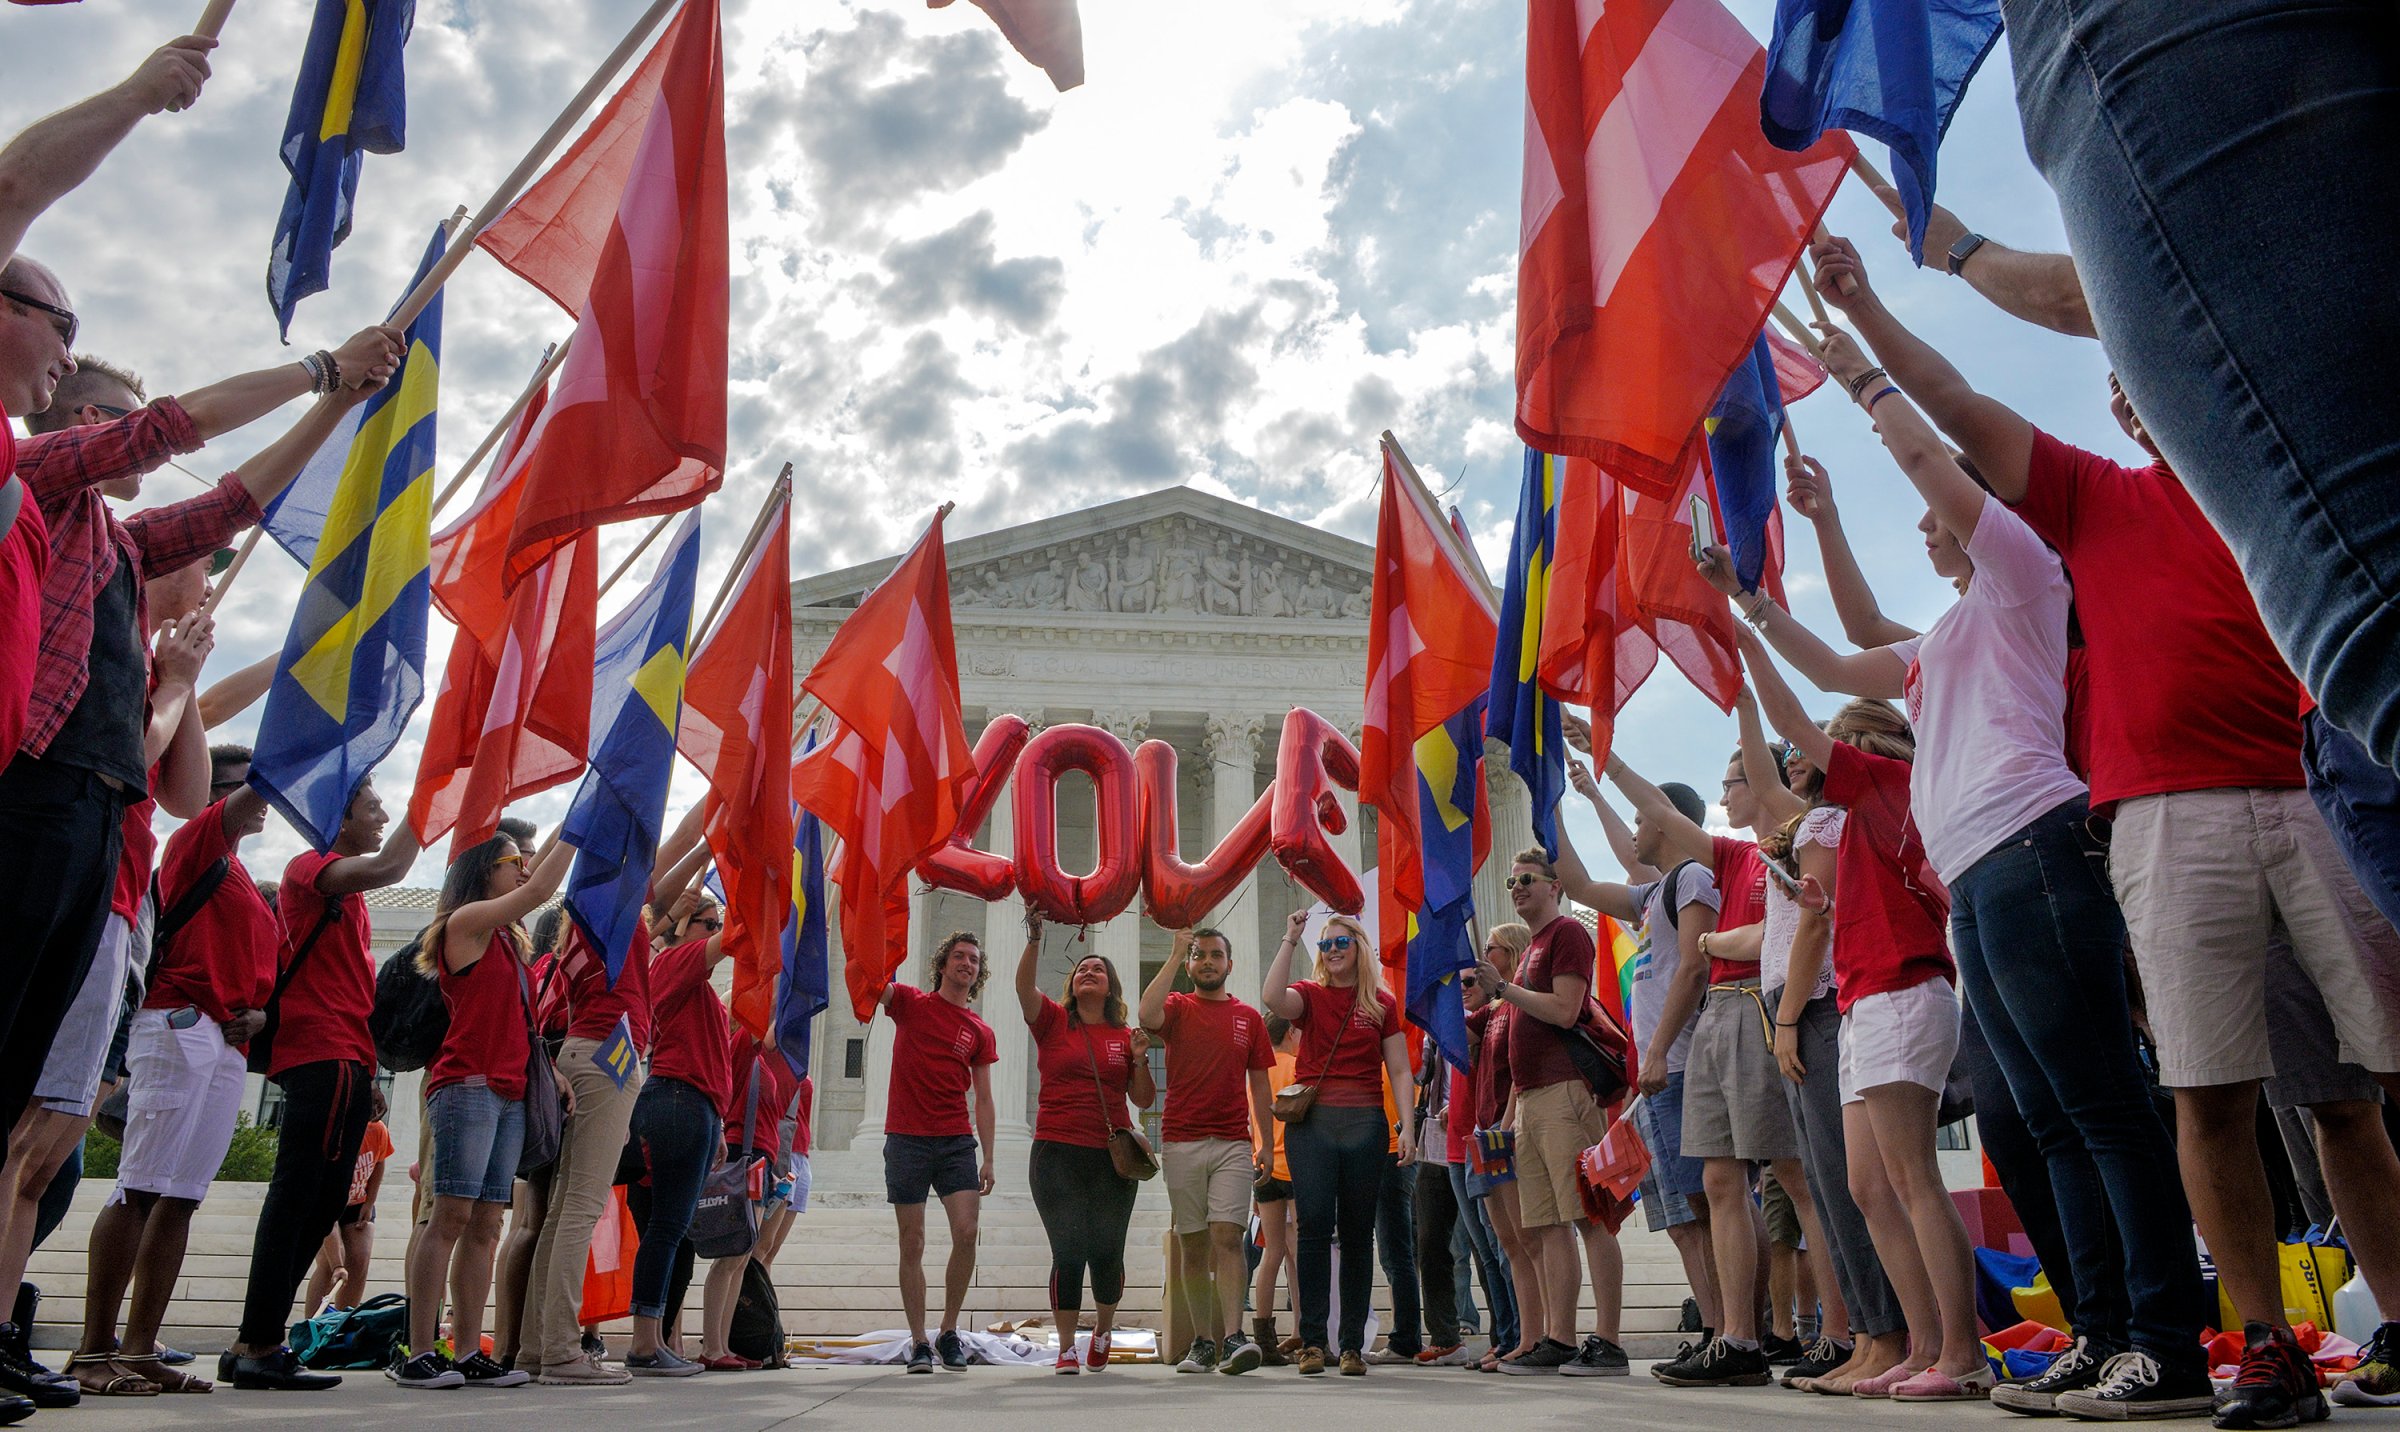 Supporters of same sex marriage rally in front of the Supreme Court awaiting a ruling to legalize gay marriage nationwide in Washington on June, 25, 2015.